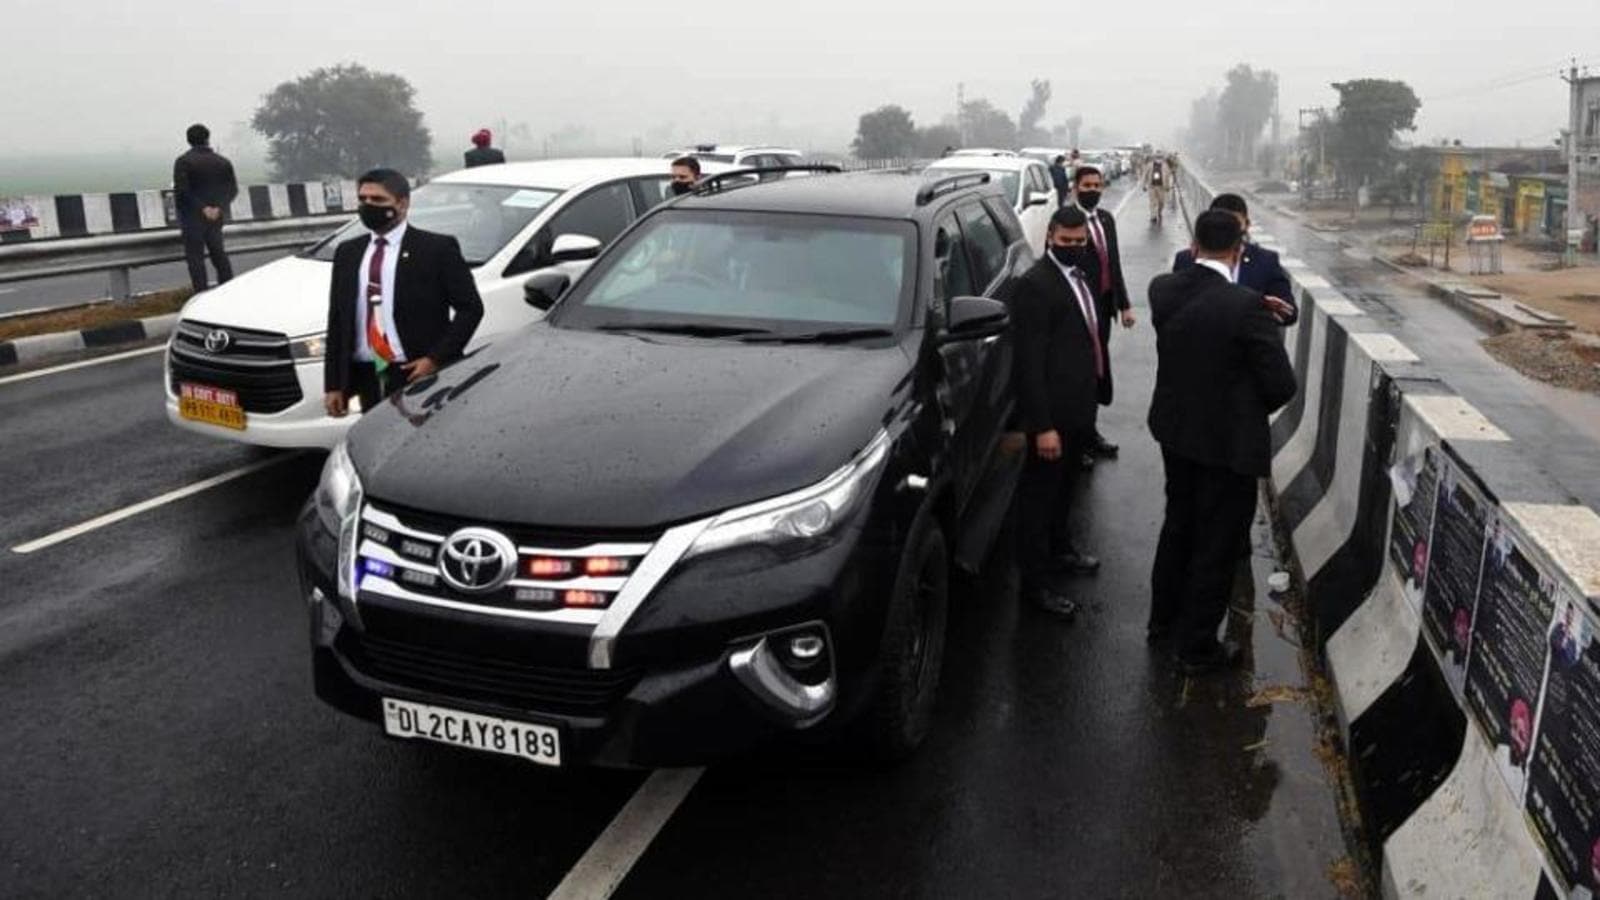 PM Modi's convoy held up: Role of Punjab Police in focus over security  fiasco